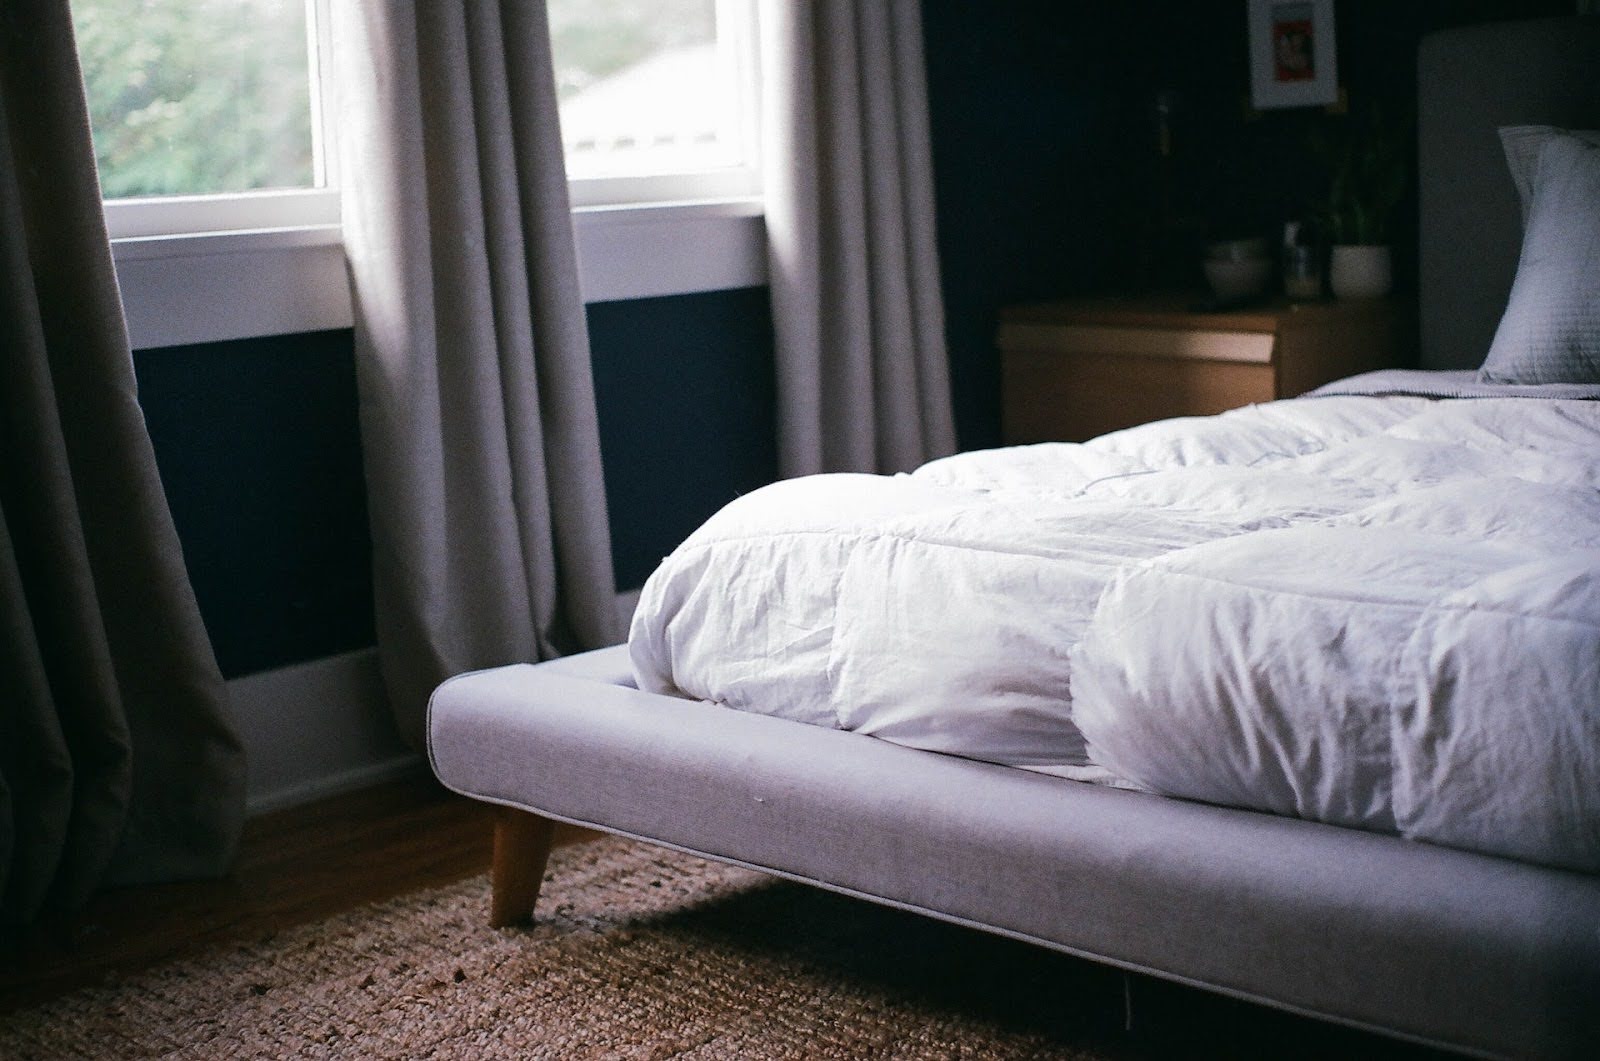 A bed sits in a room with an organic mattress topper